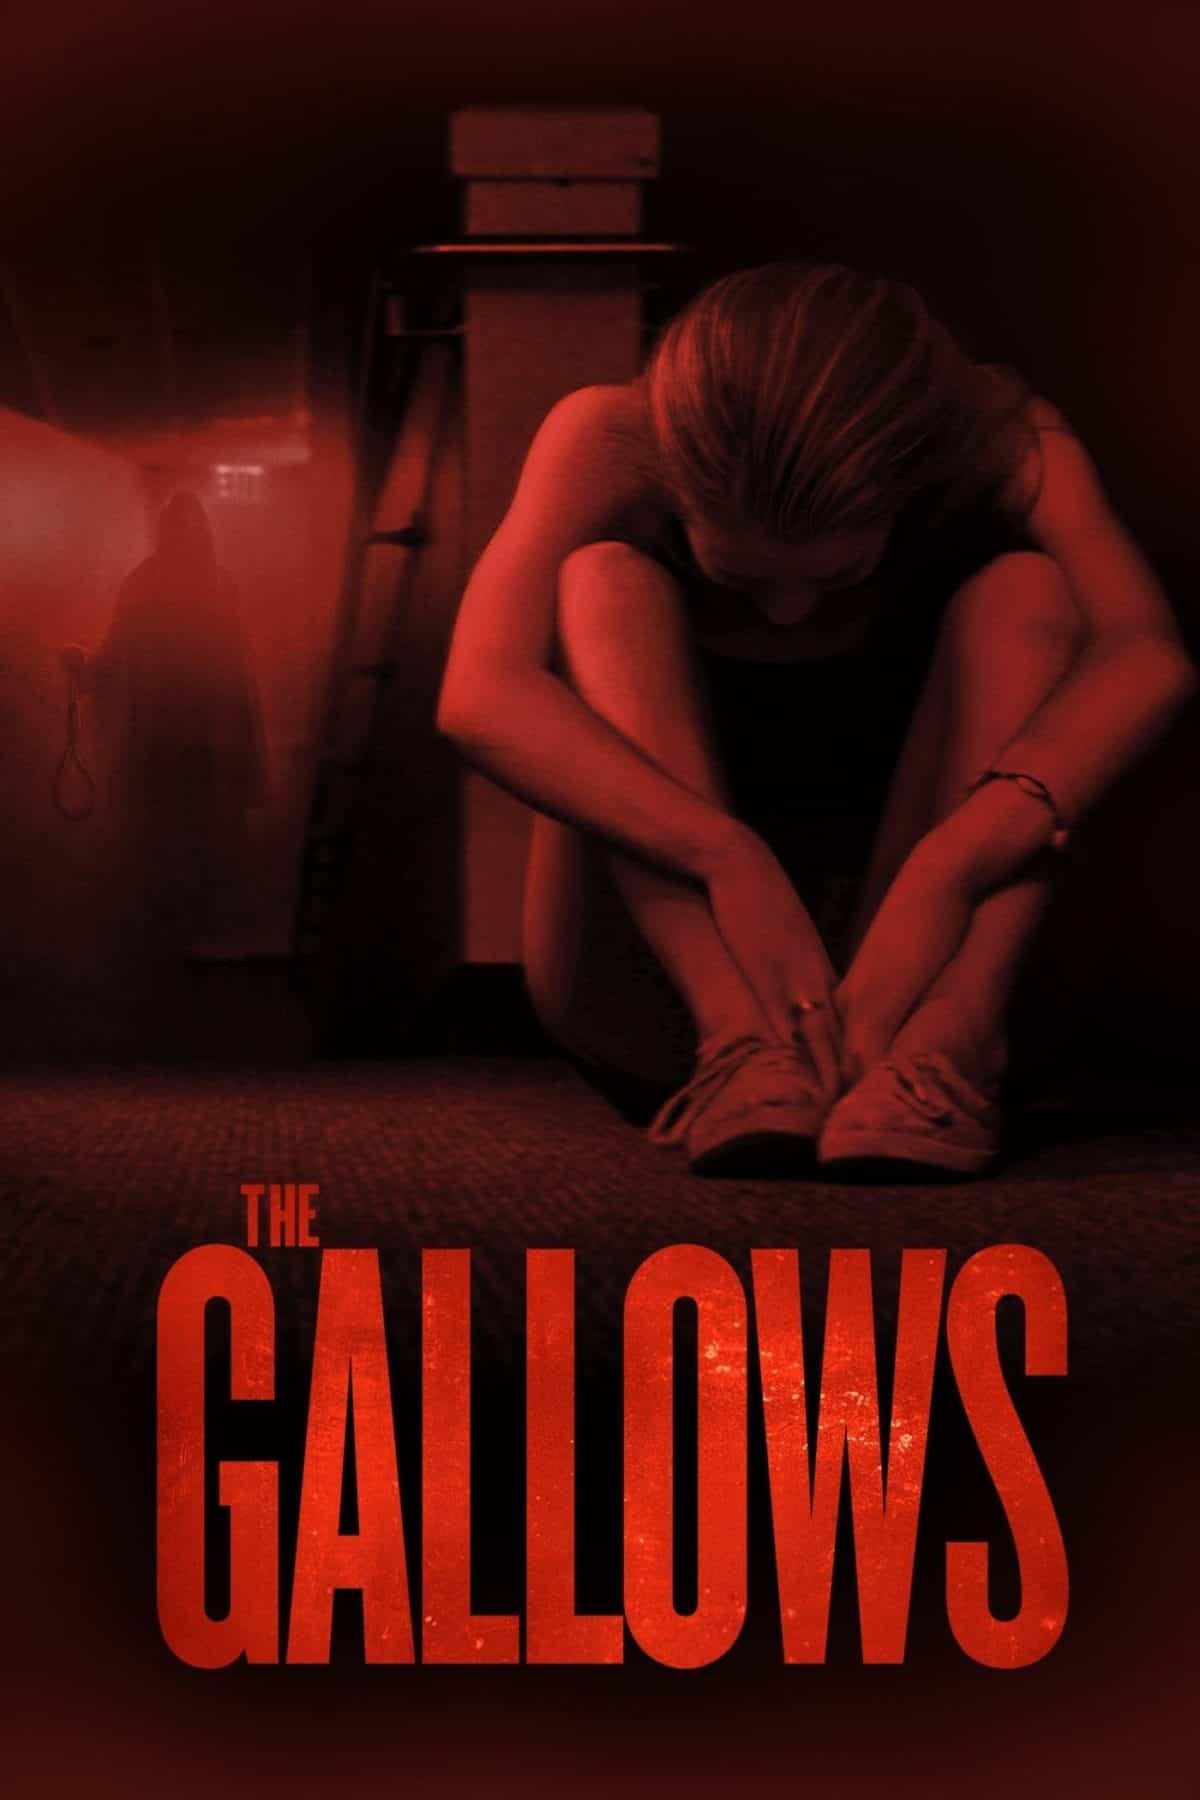 Horror Movie Review: The Gallows (2015)